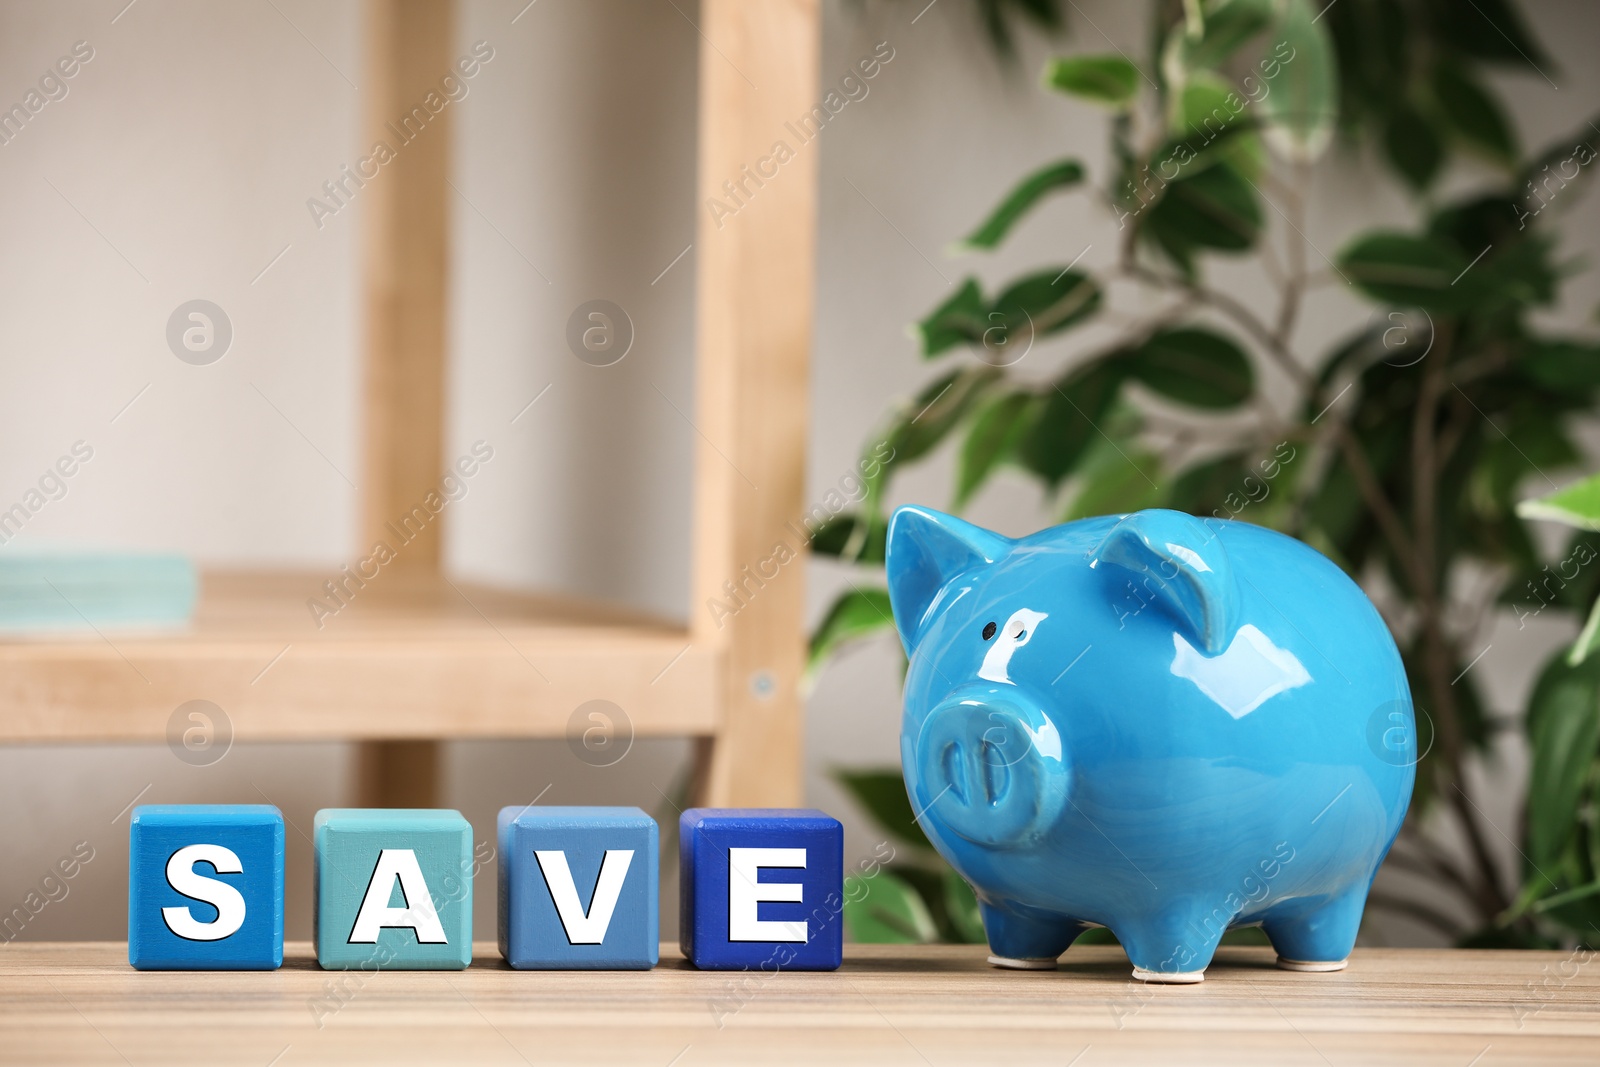 Photo of Piggy bank and word SAVE made of colorful cubes on wooden table against blurred background